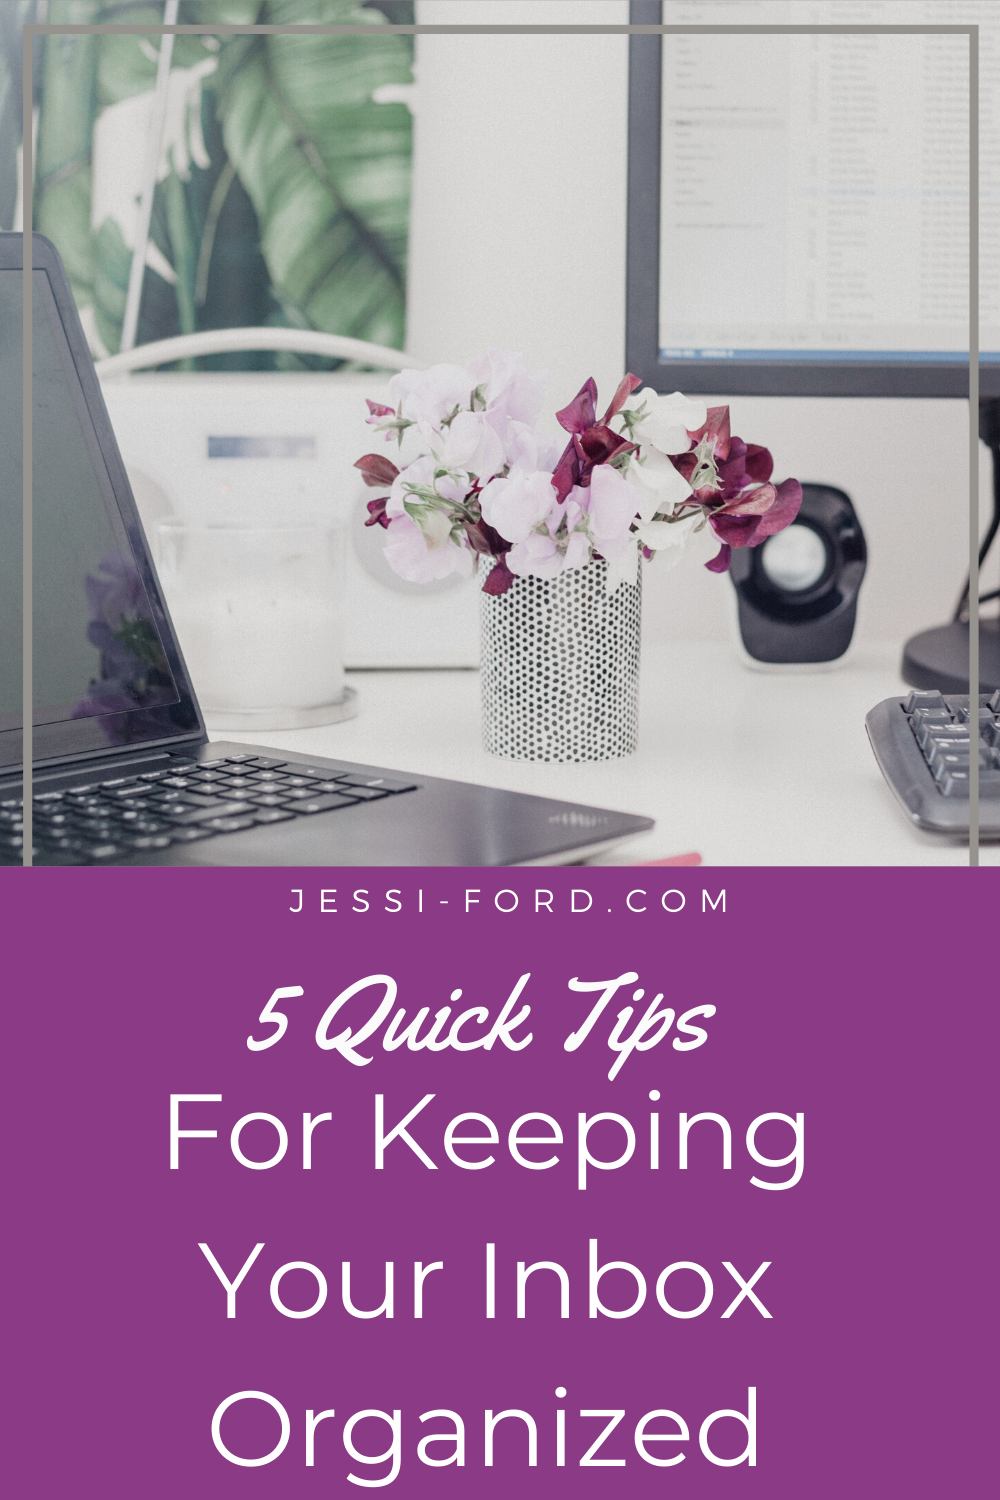 5 Quick Tips for Keeping Your Inbox Organized